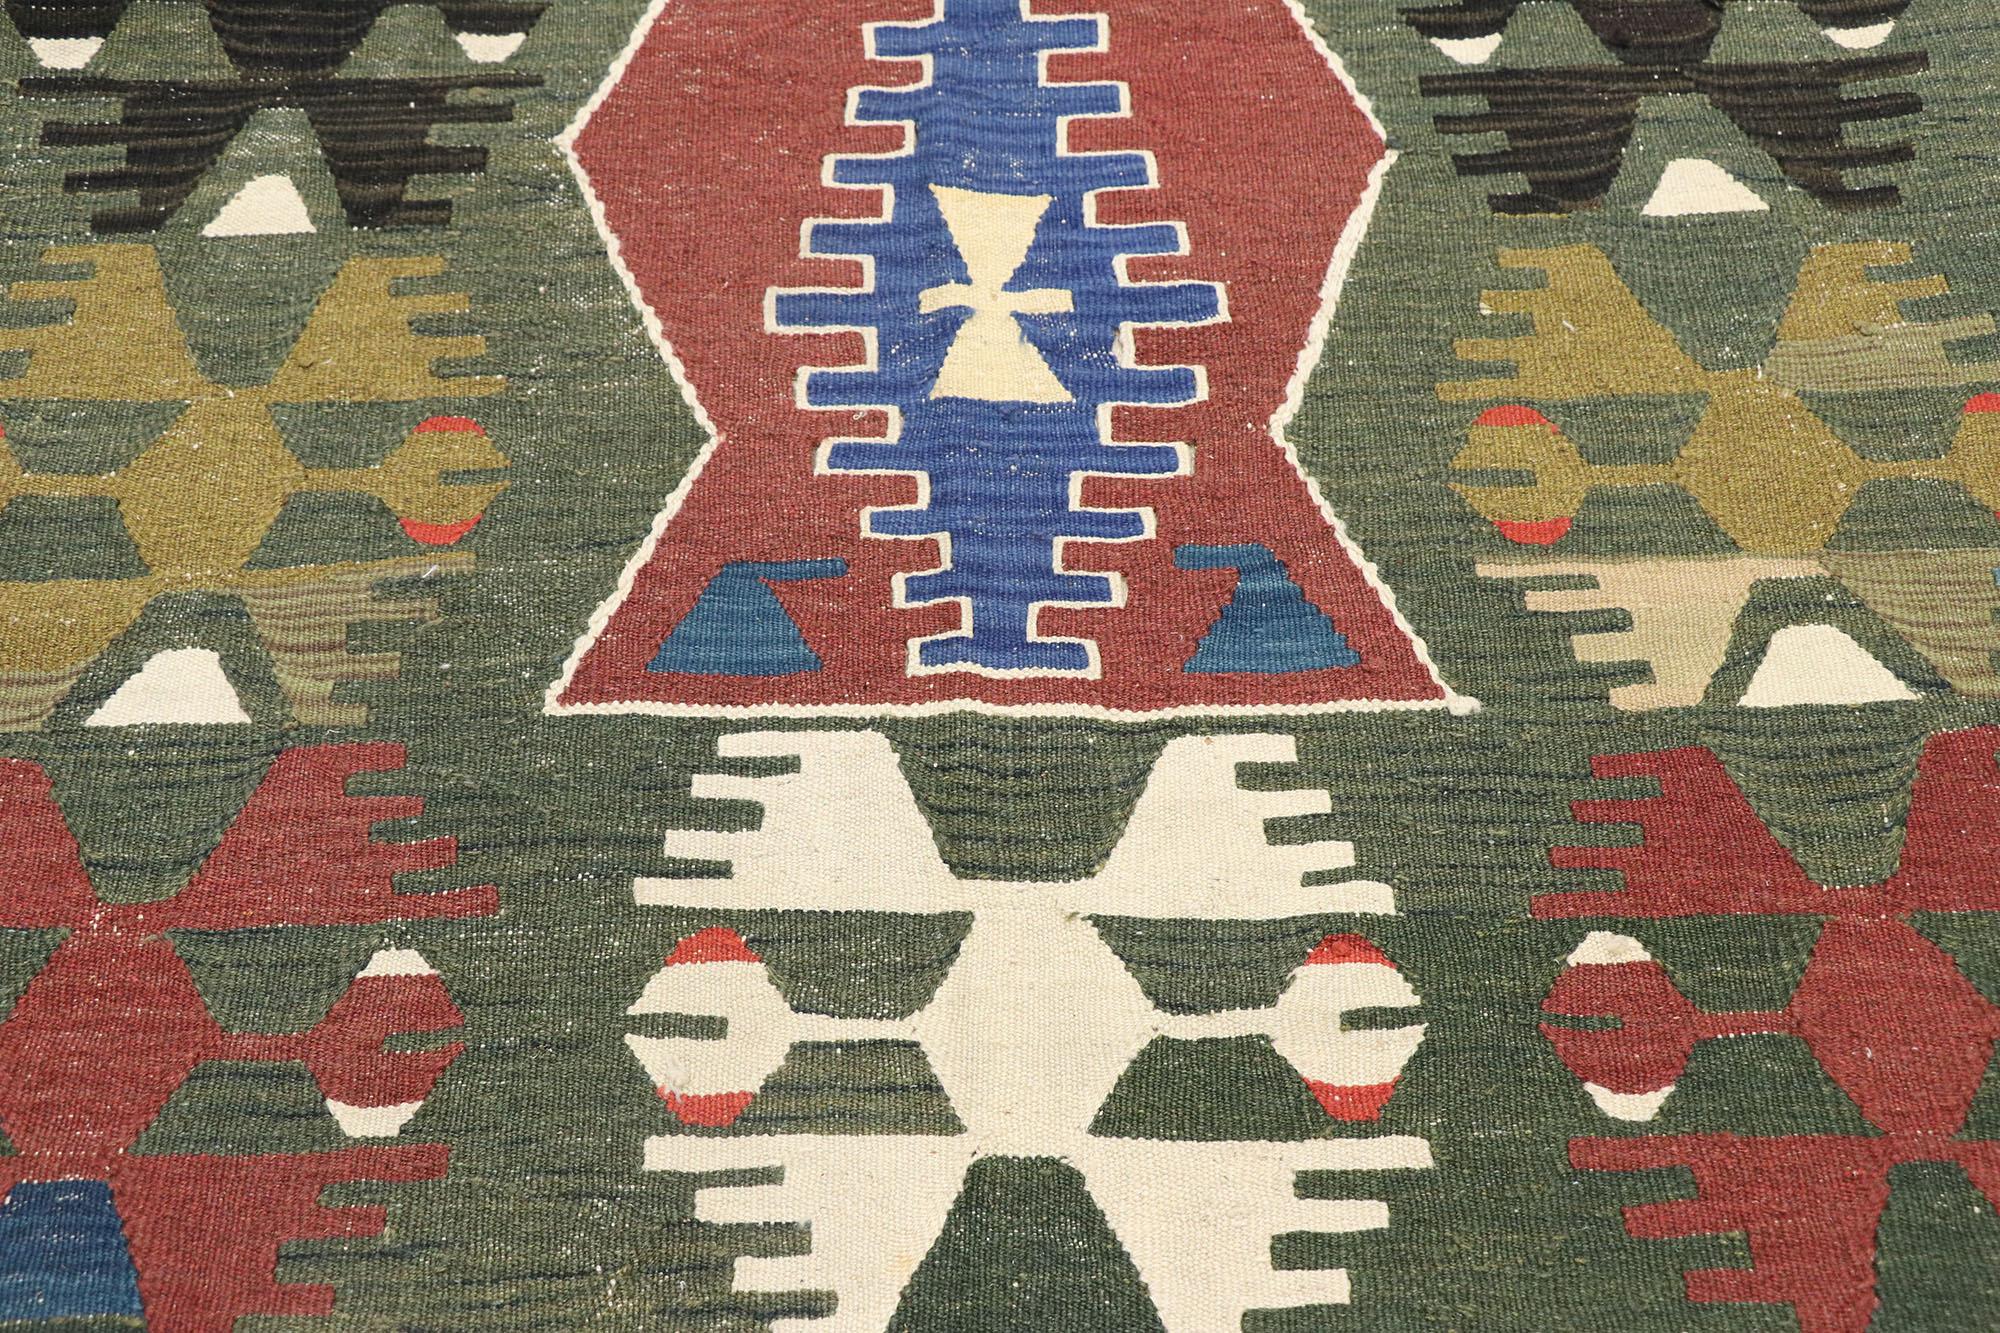 Vintage Persian Shiraz Kilim Rug, Earthy Southwest Meets Modern Tribal Style In Good Condition For Sale In Dallas, TX